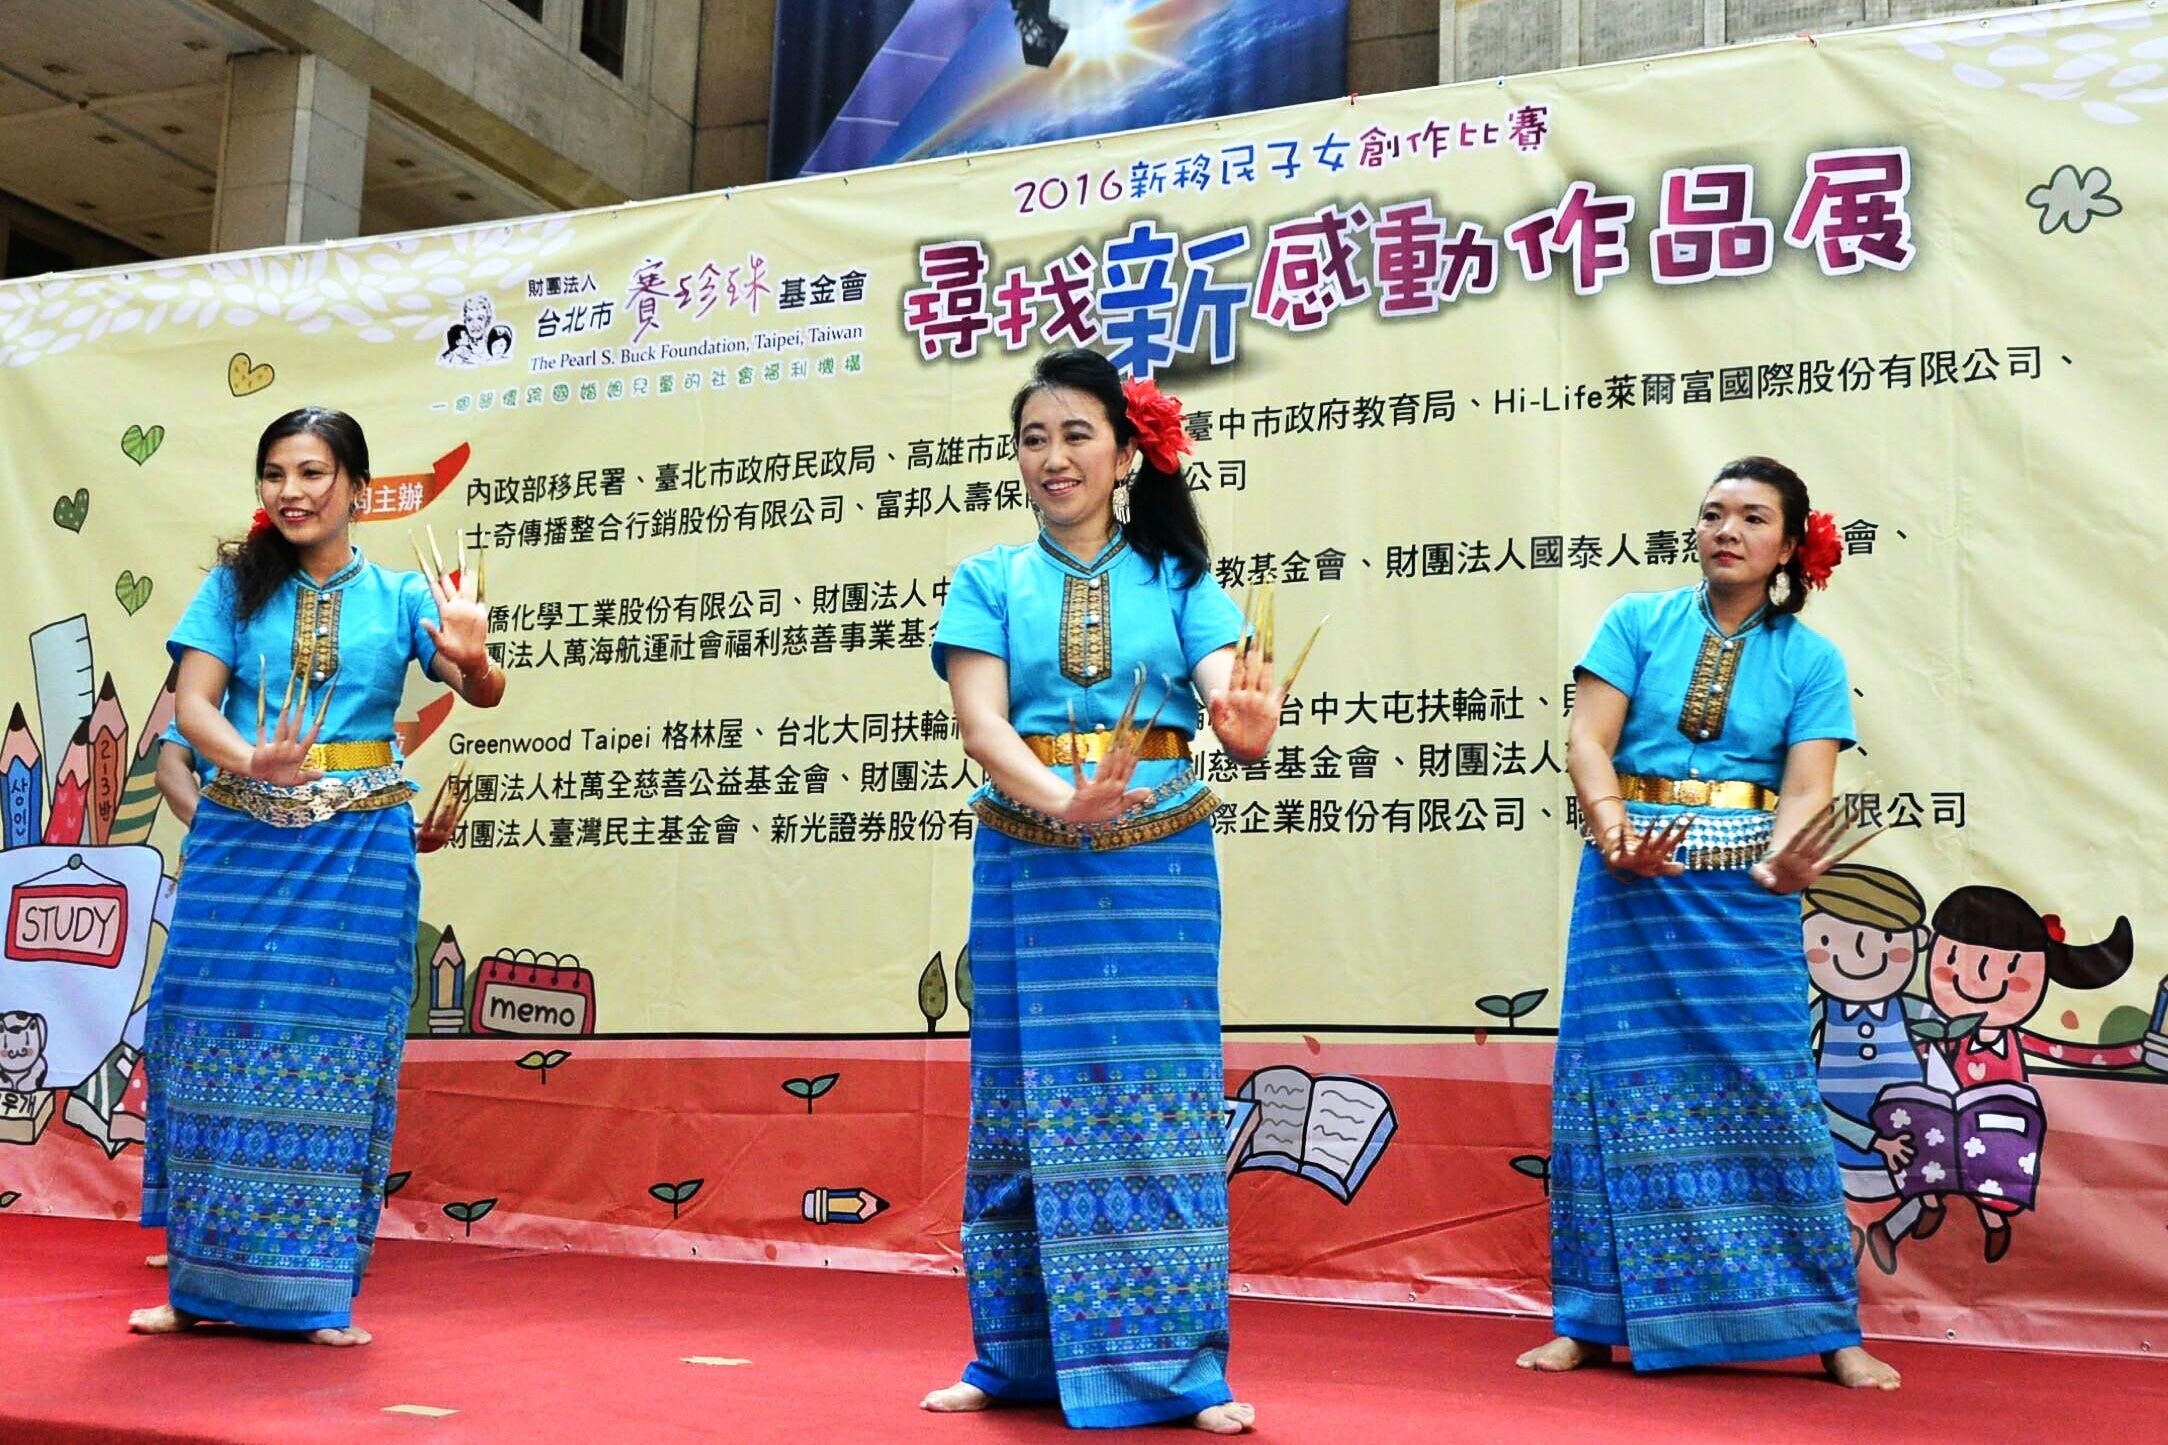 At The Pearl S.Buck Foundation in Taipei show some traditional dance